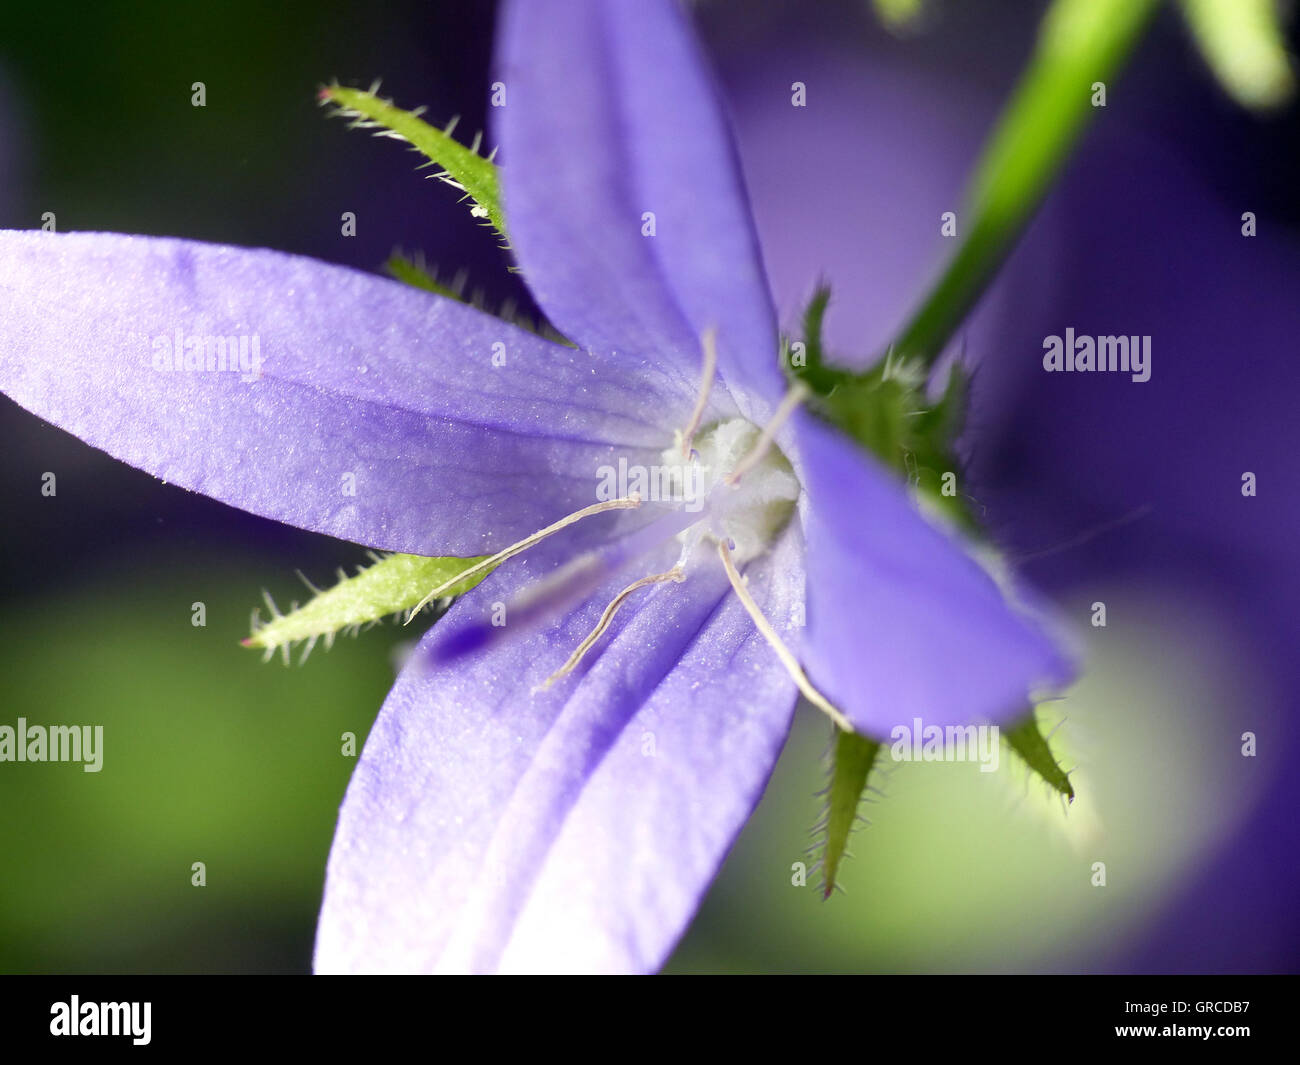 Bellflower Closeup, Campanula, Which Has Lost A Petal. The Bellflower Normally Has Five Petals Stock Photo